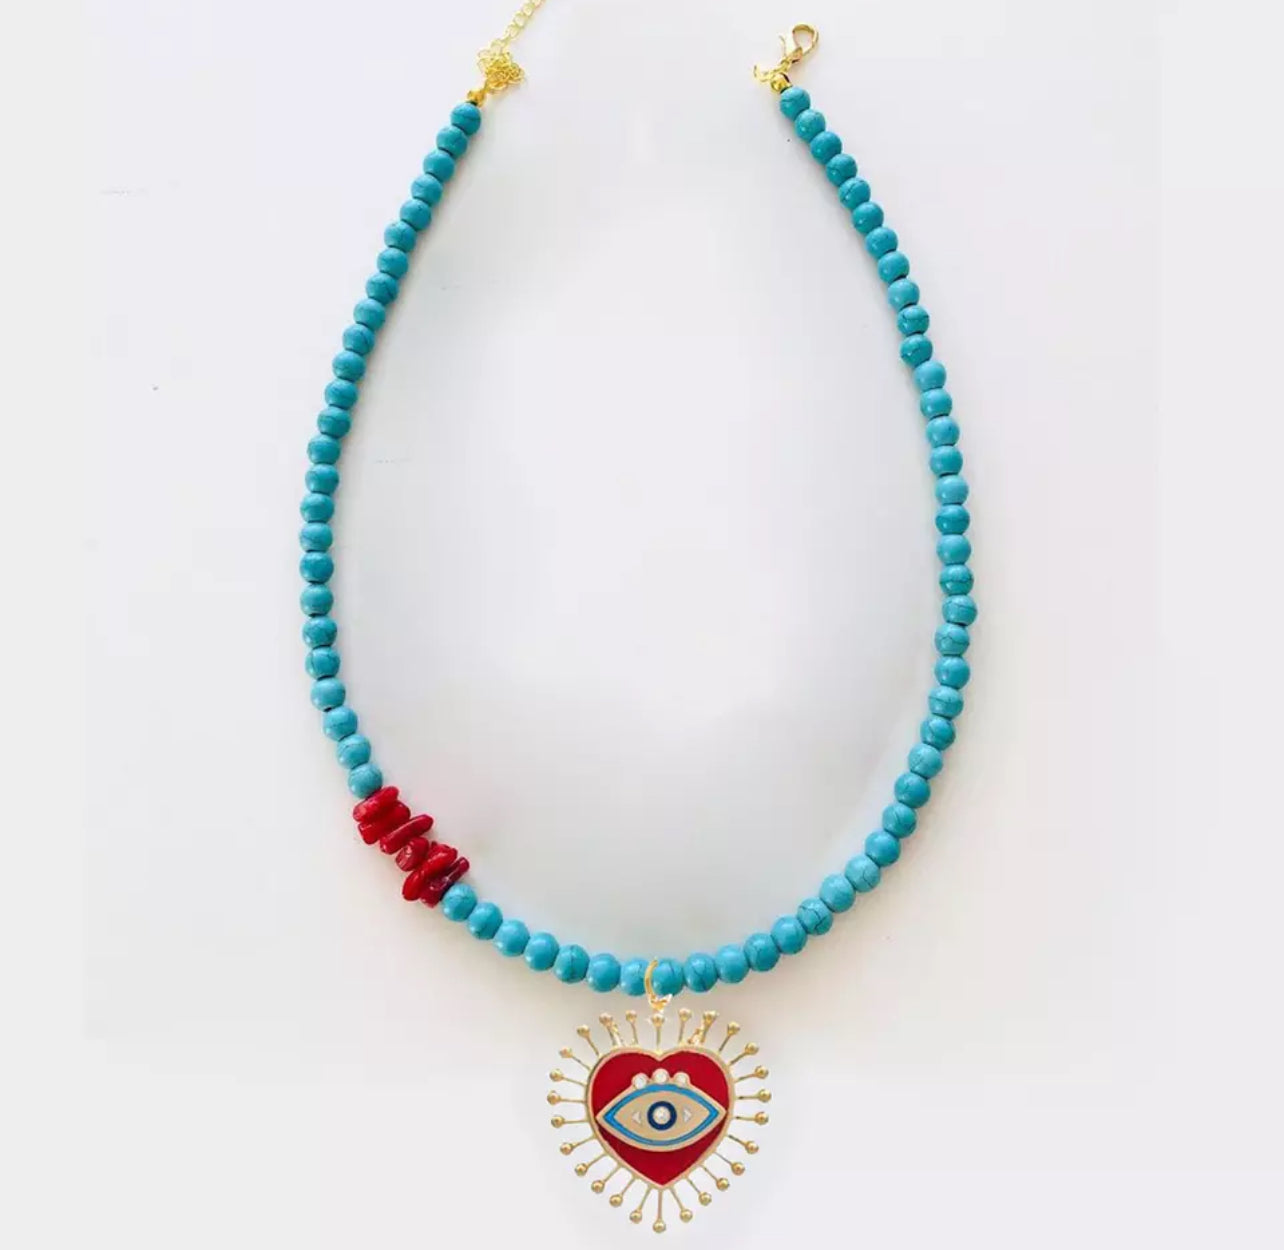 Necklace turquoise red third eye pendant